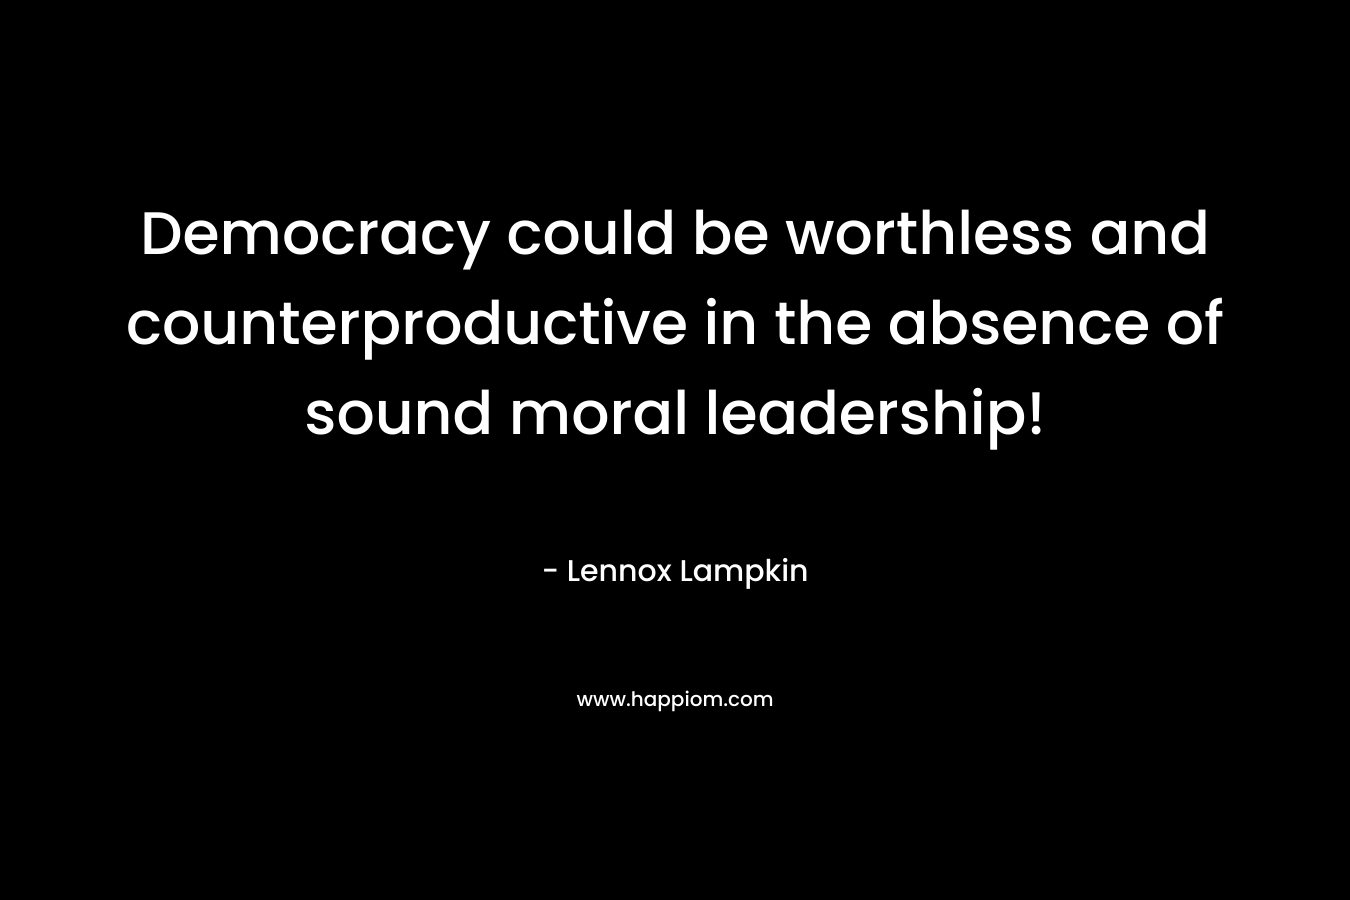 Democracy could be worthless and counterproductive in the absence of sound moral leadership!